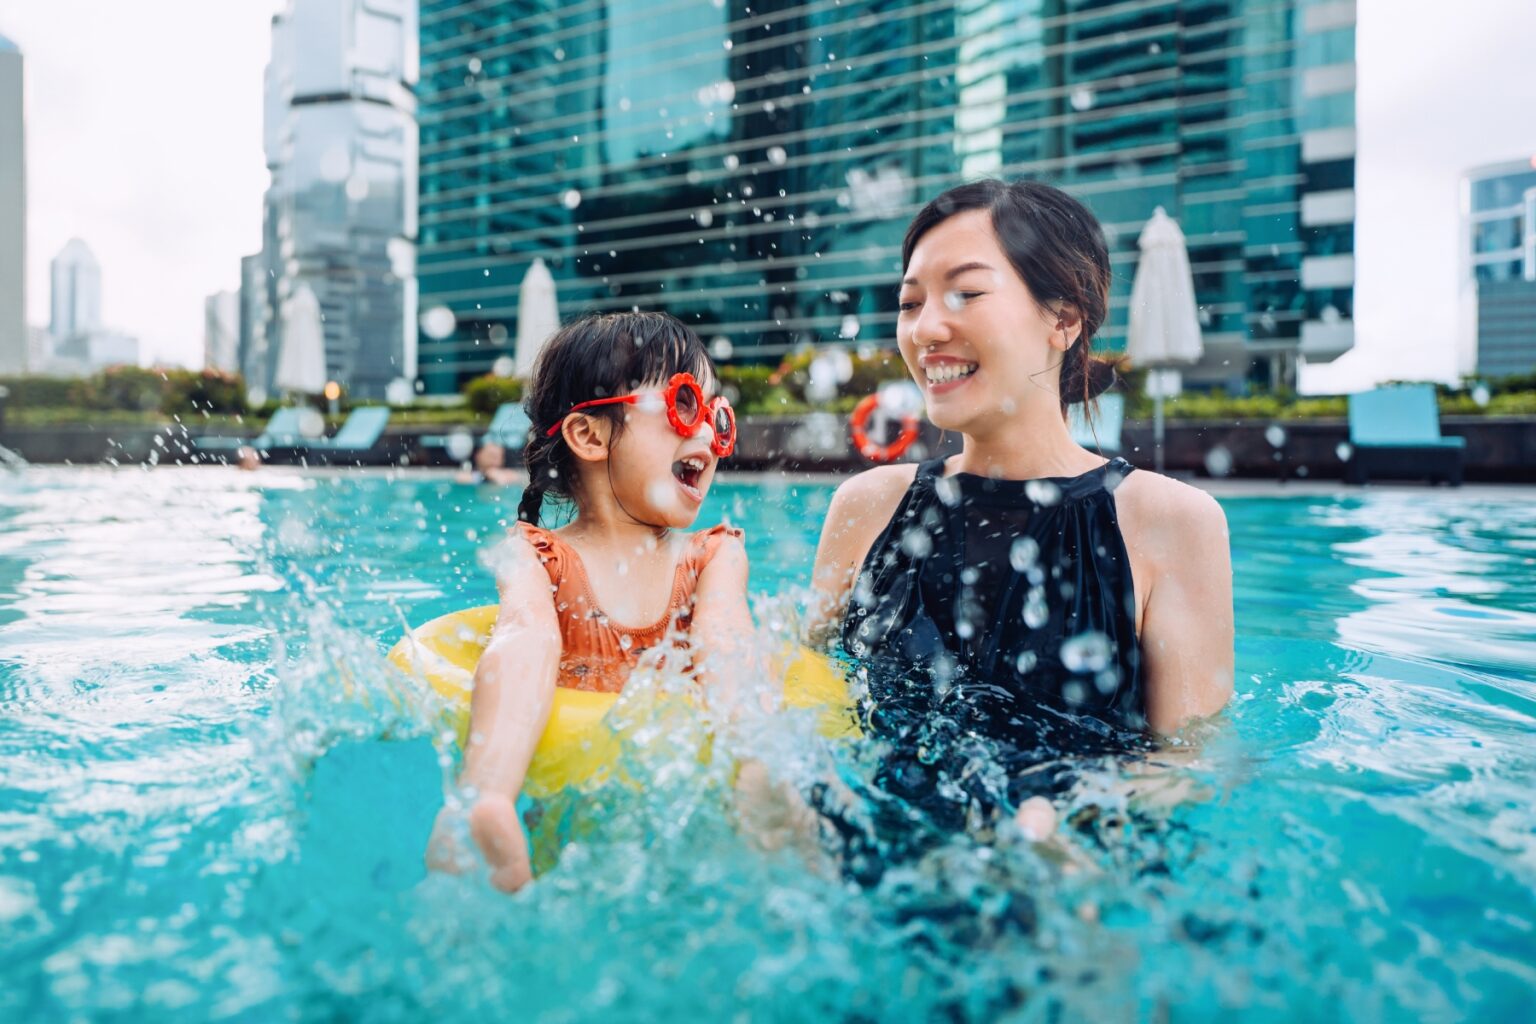 Mother and daughter laugh and splash around in a pool together outside